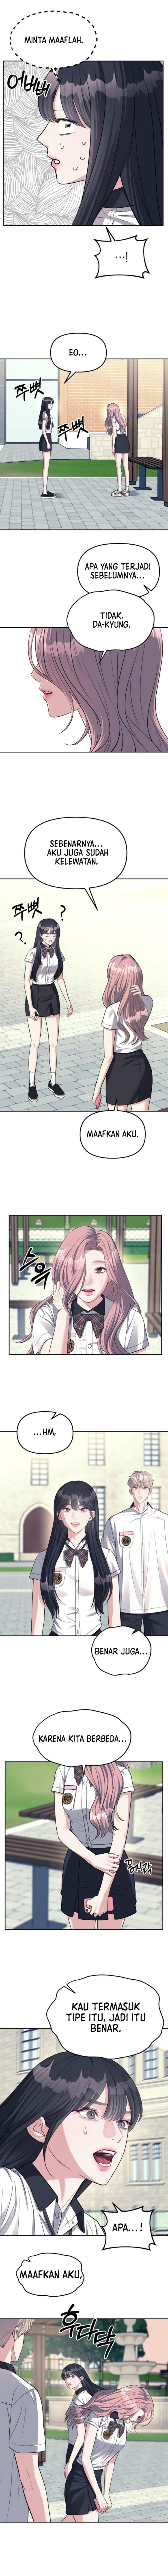 Undercover! Chaebol High School Chapter 34